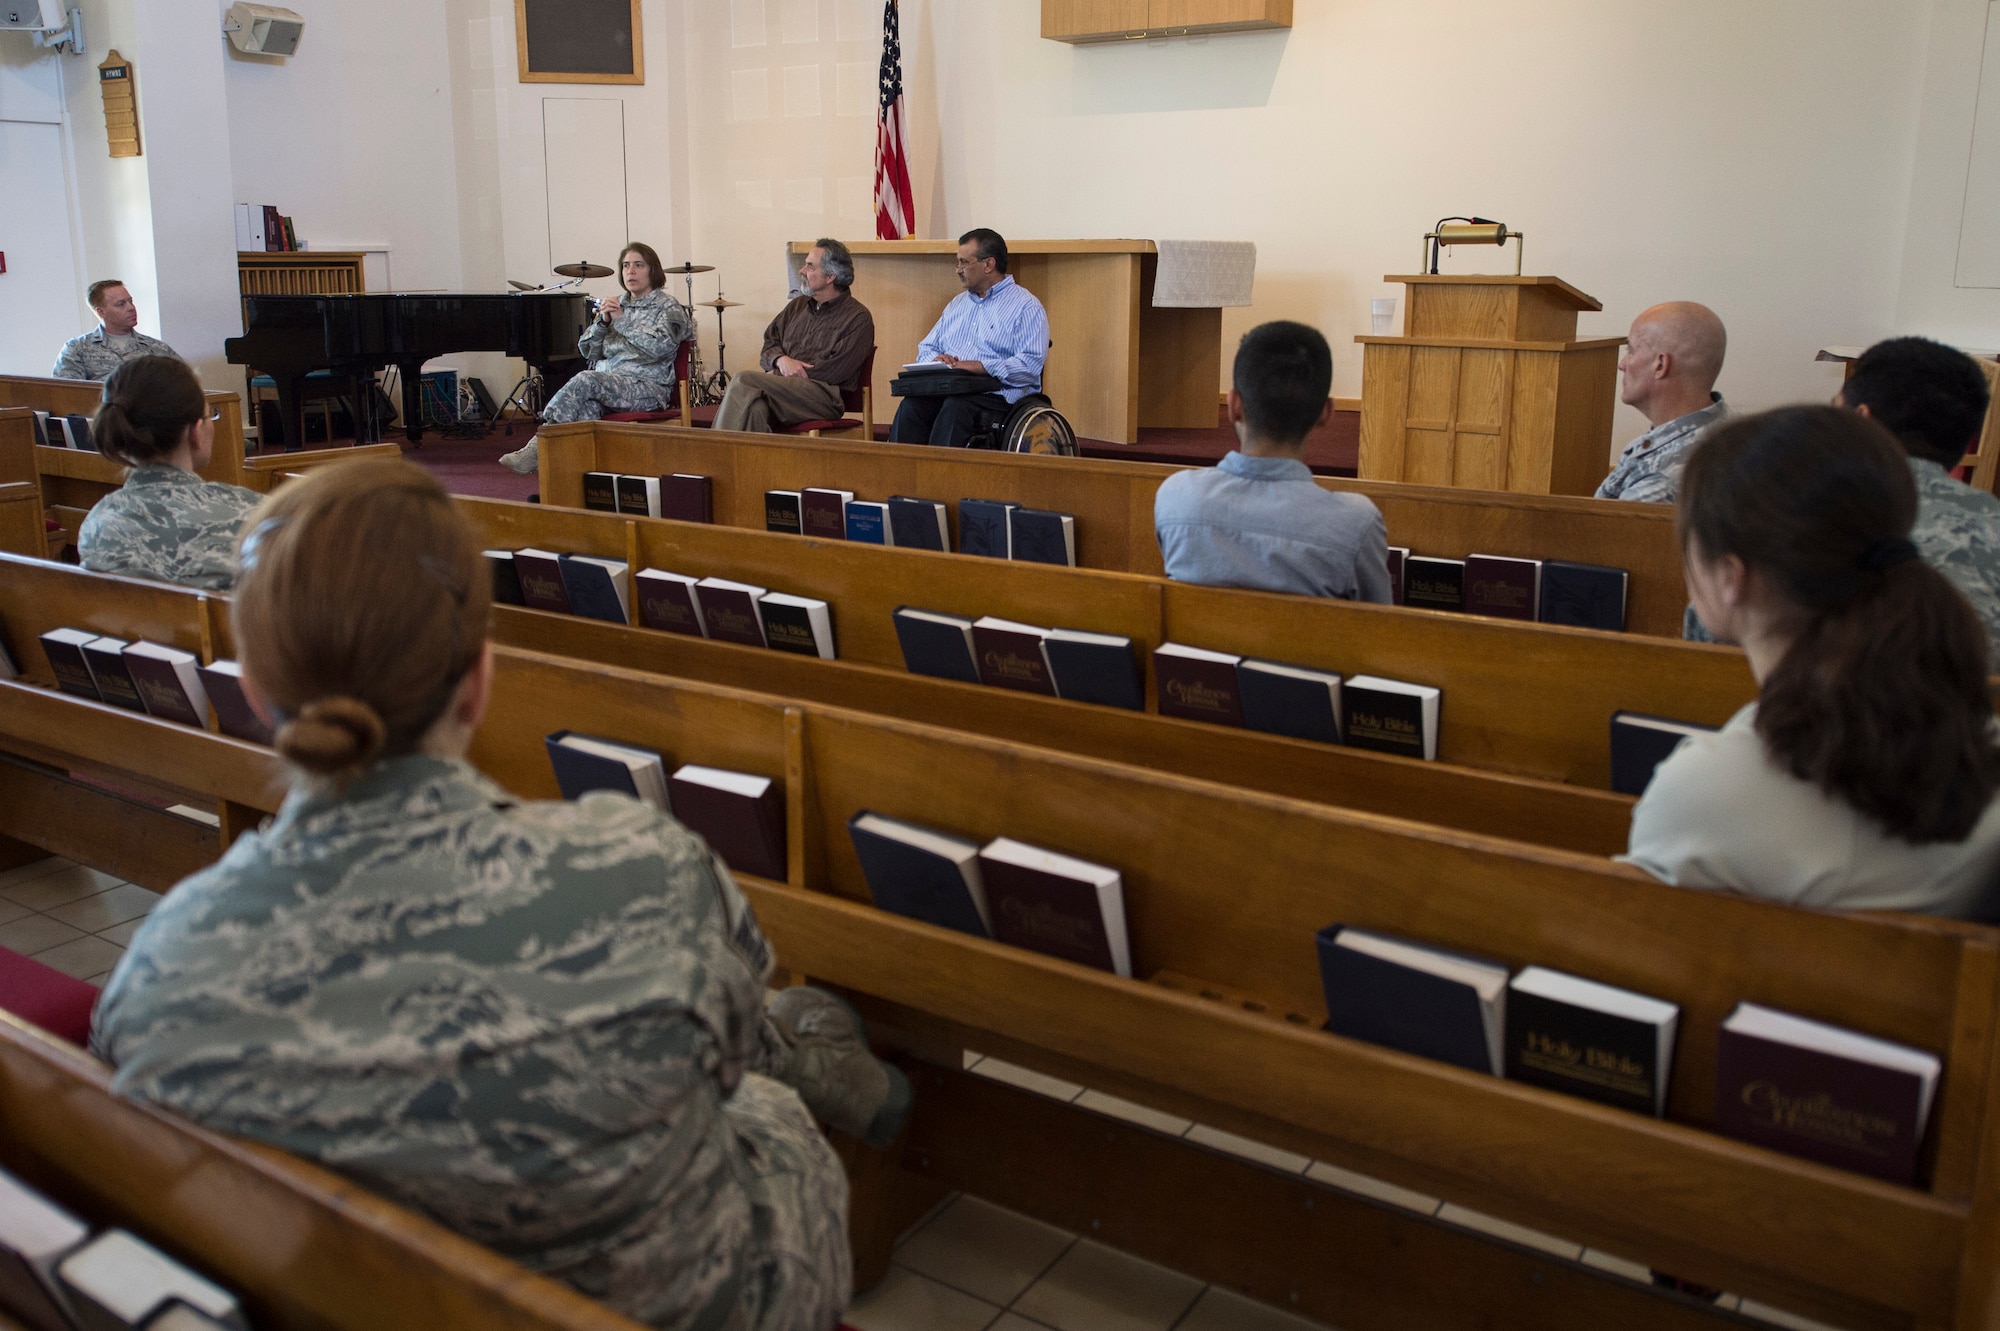 Representatives from Judaism, Christianity and Islam answer questions during a multi-faith panel during a 52nd Fighter Wing Resiliency Day on Spangdahlem Air Base, Germany, June 4, 2015. The 52nd FW Resiliency Day spotlighted base resources to assist Airmen and their families to develop stronger coping skills as part of the Comprehensive Airman Fitness initiative. (U.S. Air force photo by Staff Sgt. Christopher Ruano/Released)